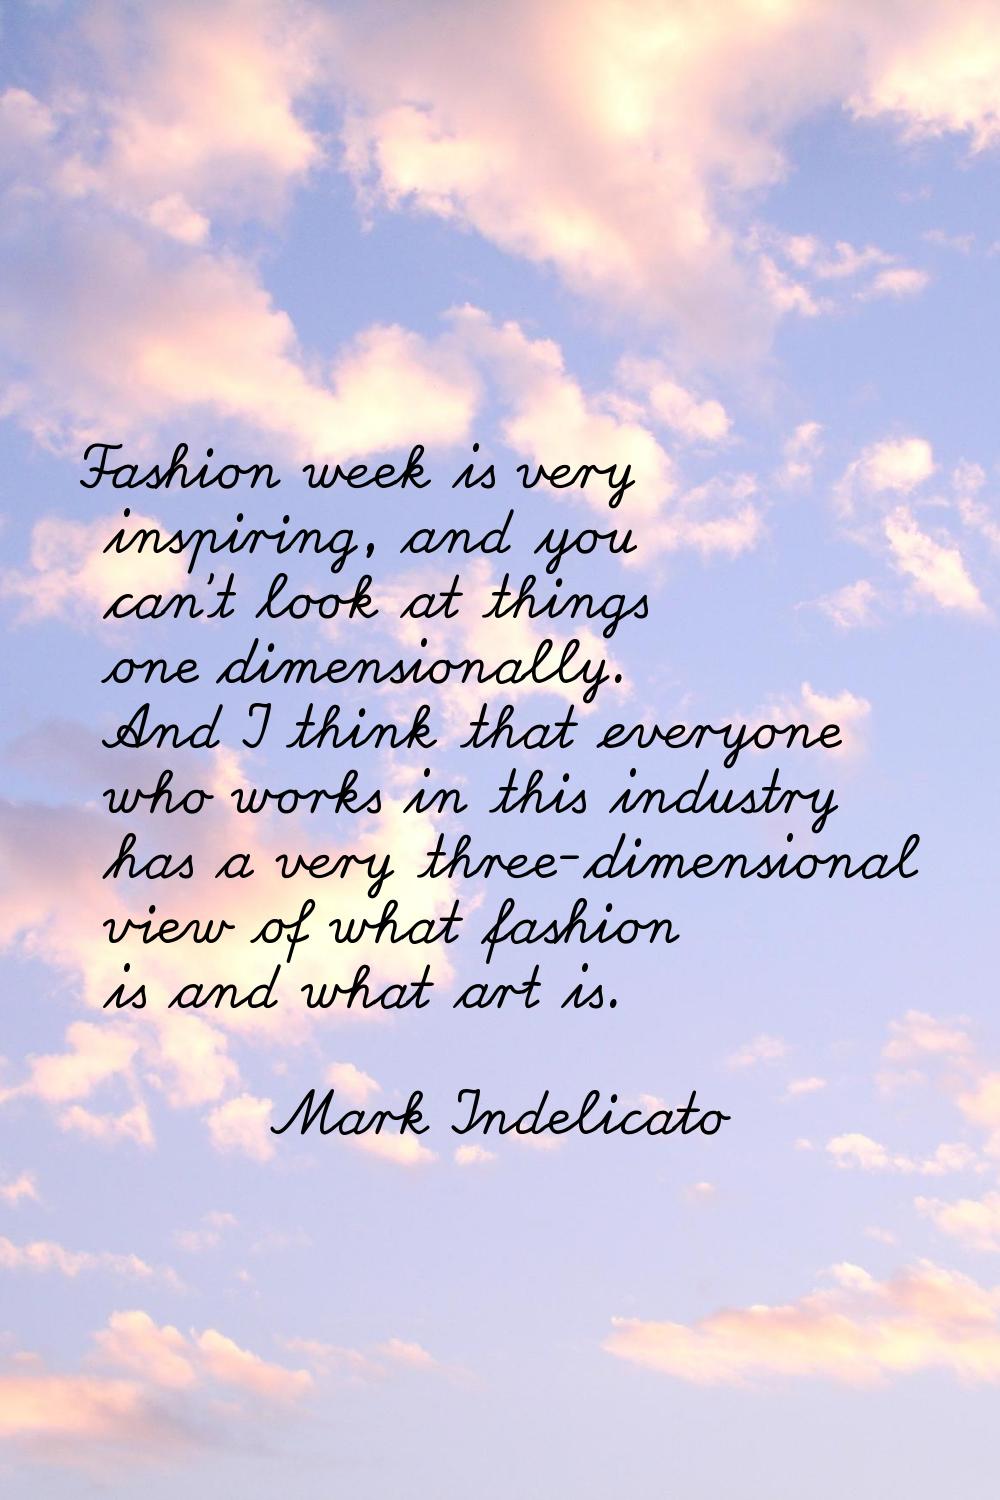 Fashion week is very inspiring, and you can't look at things one dimensionally. And I think that ev